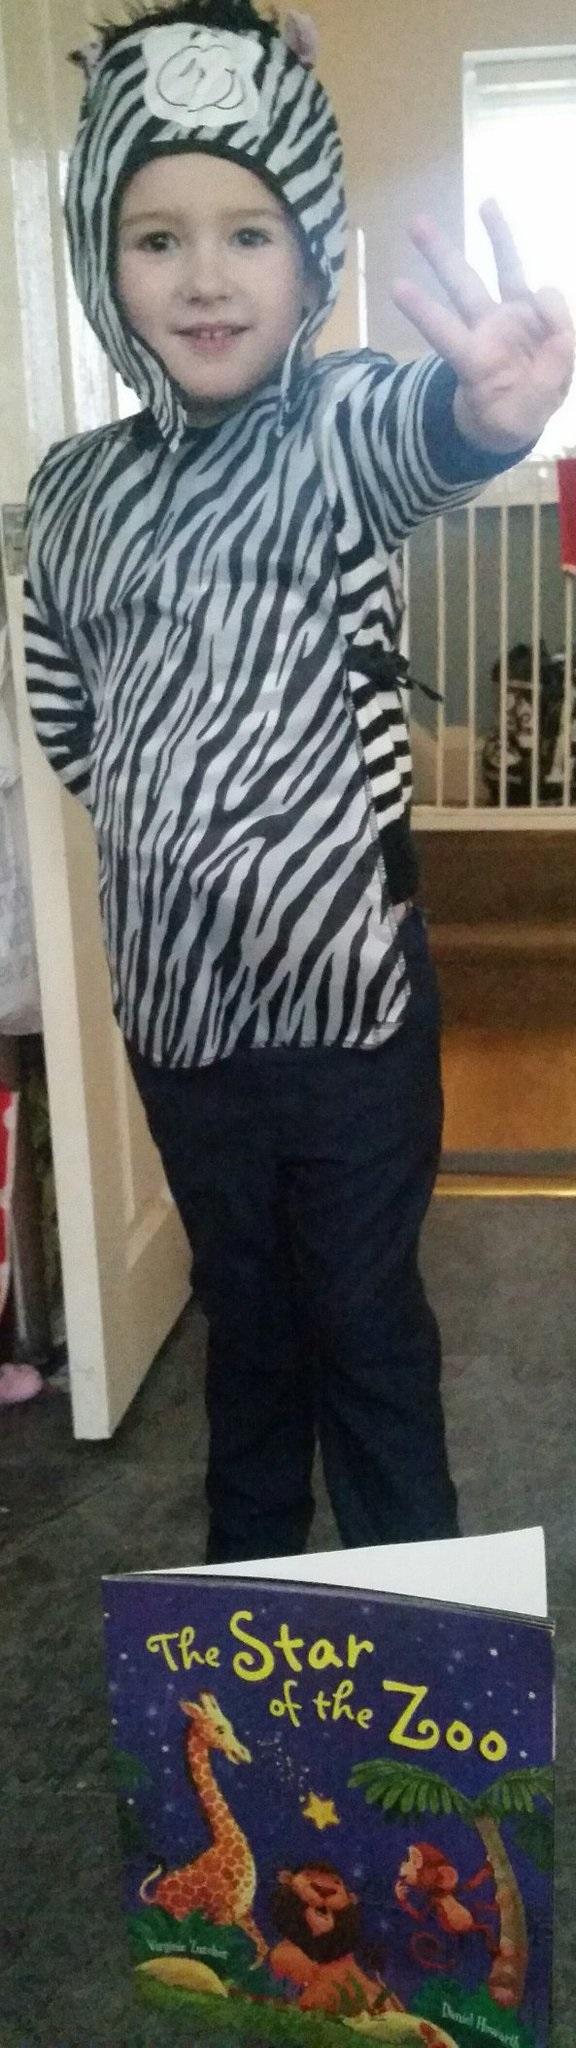 Barnton Primary's Jenson King is Zebra from "Ths star of the zoo"